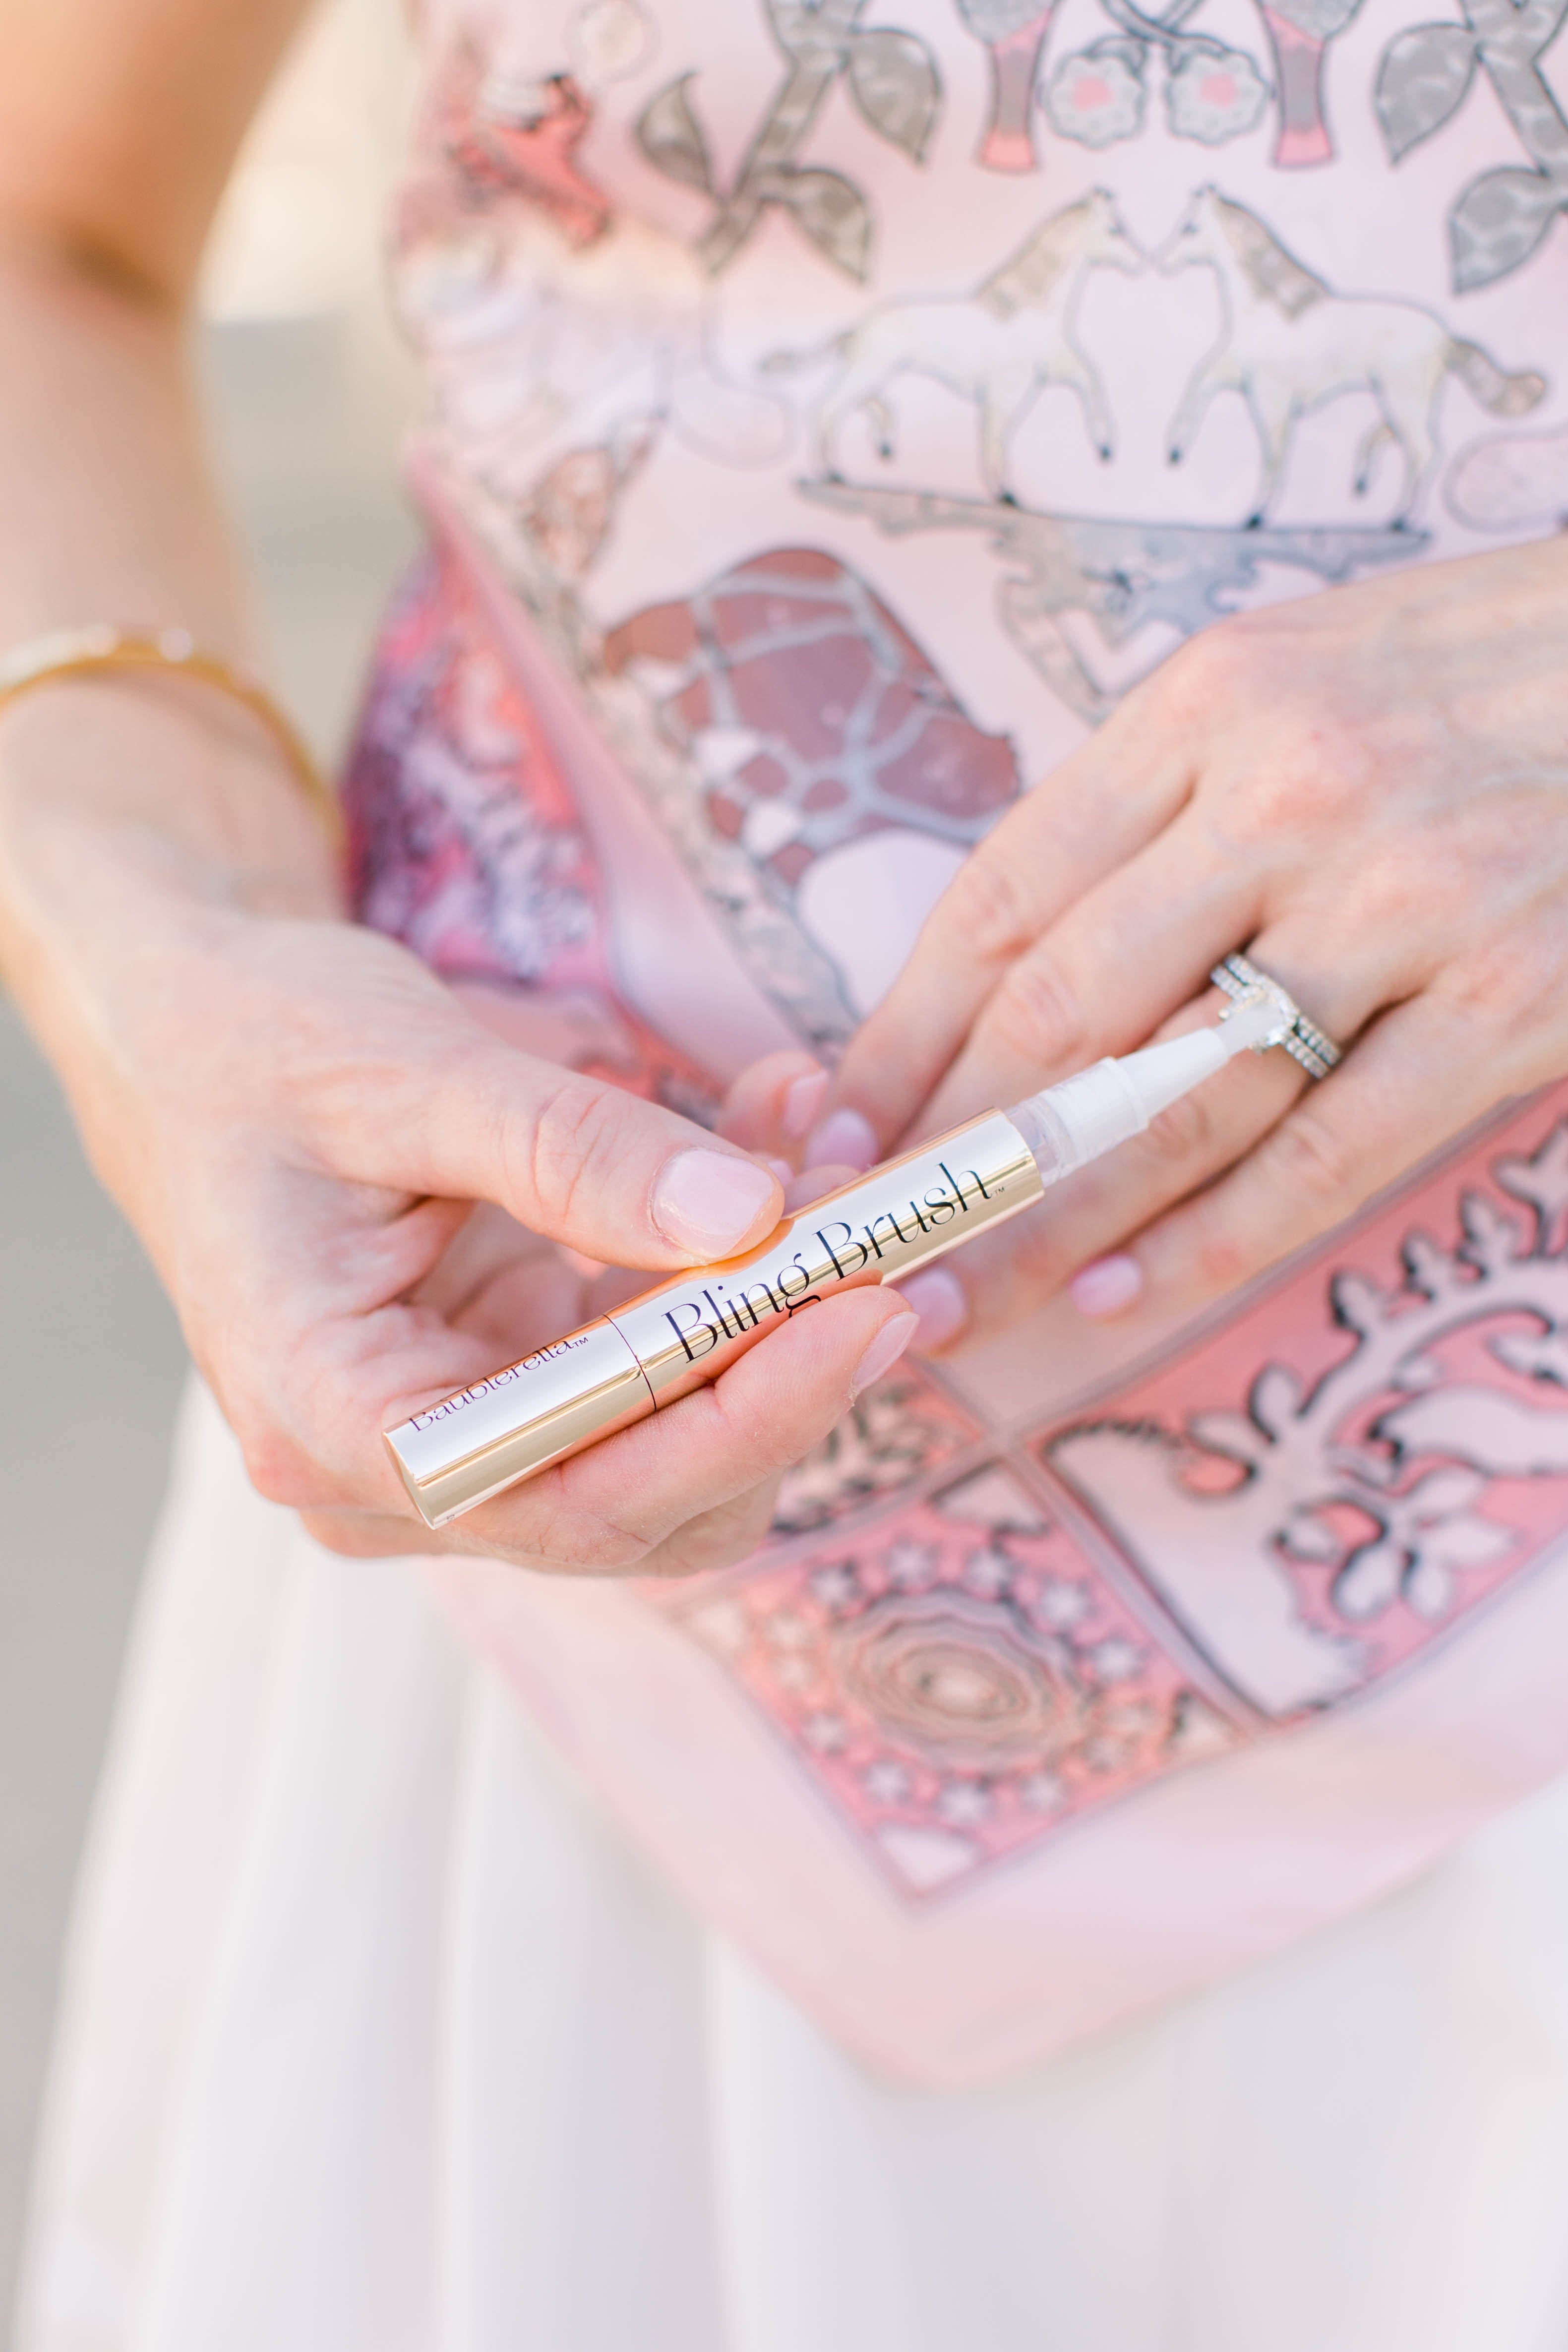 Baublerella - Bling Brush - On-The-Go Jewelry Cleaner